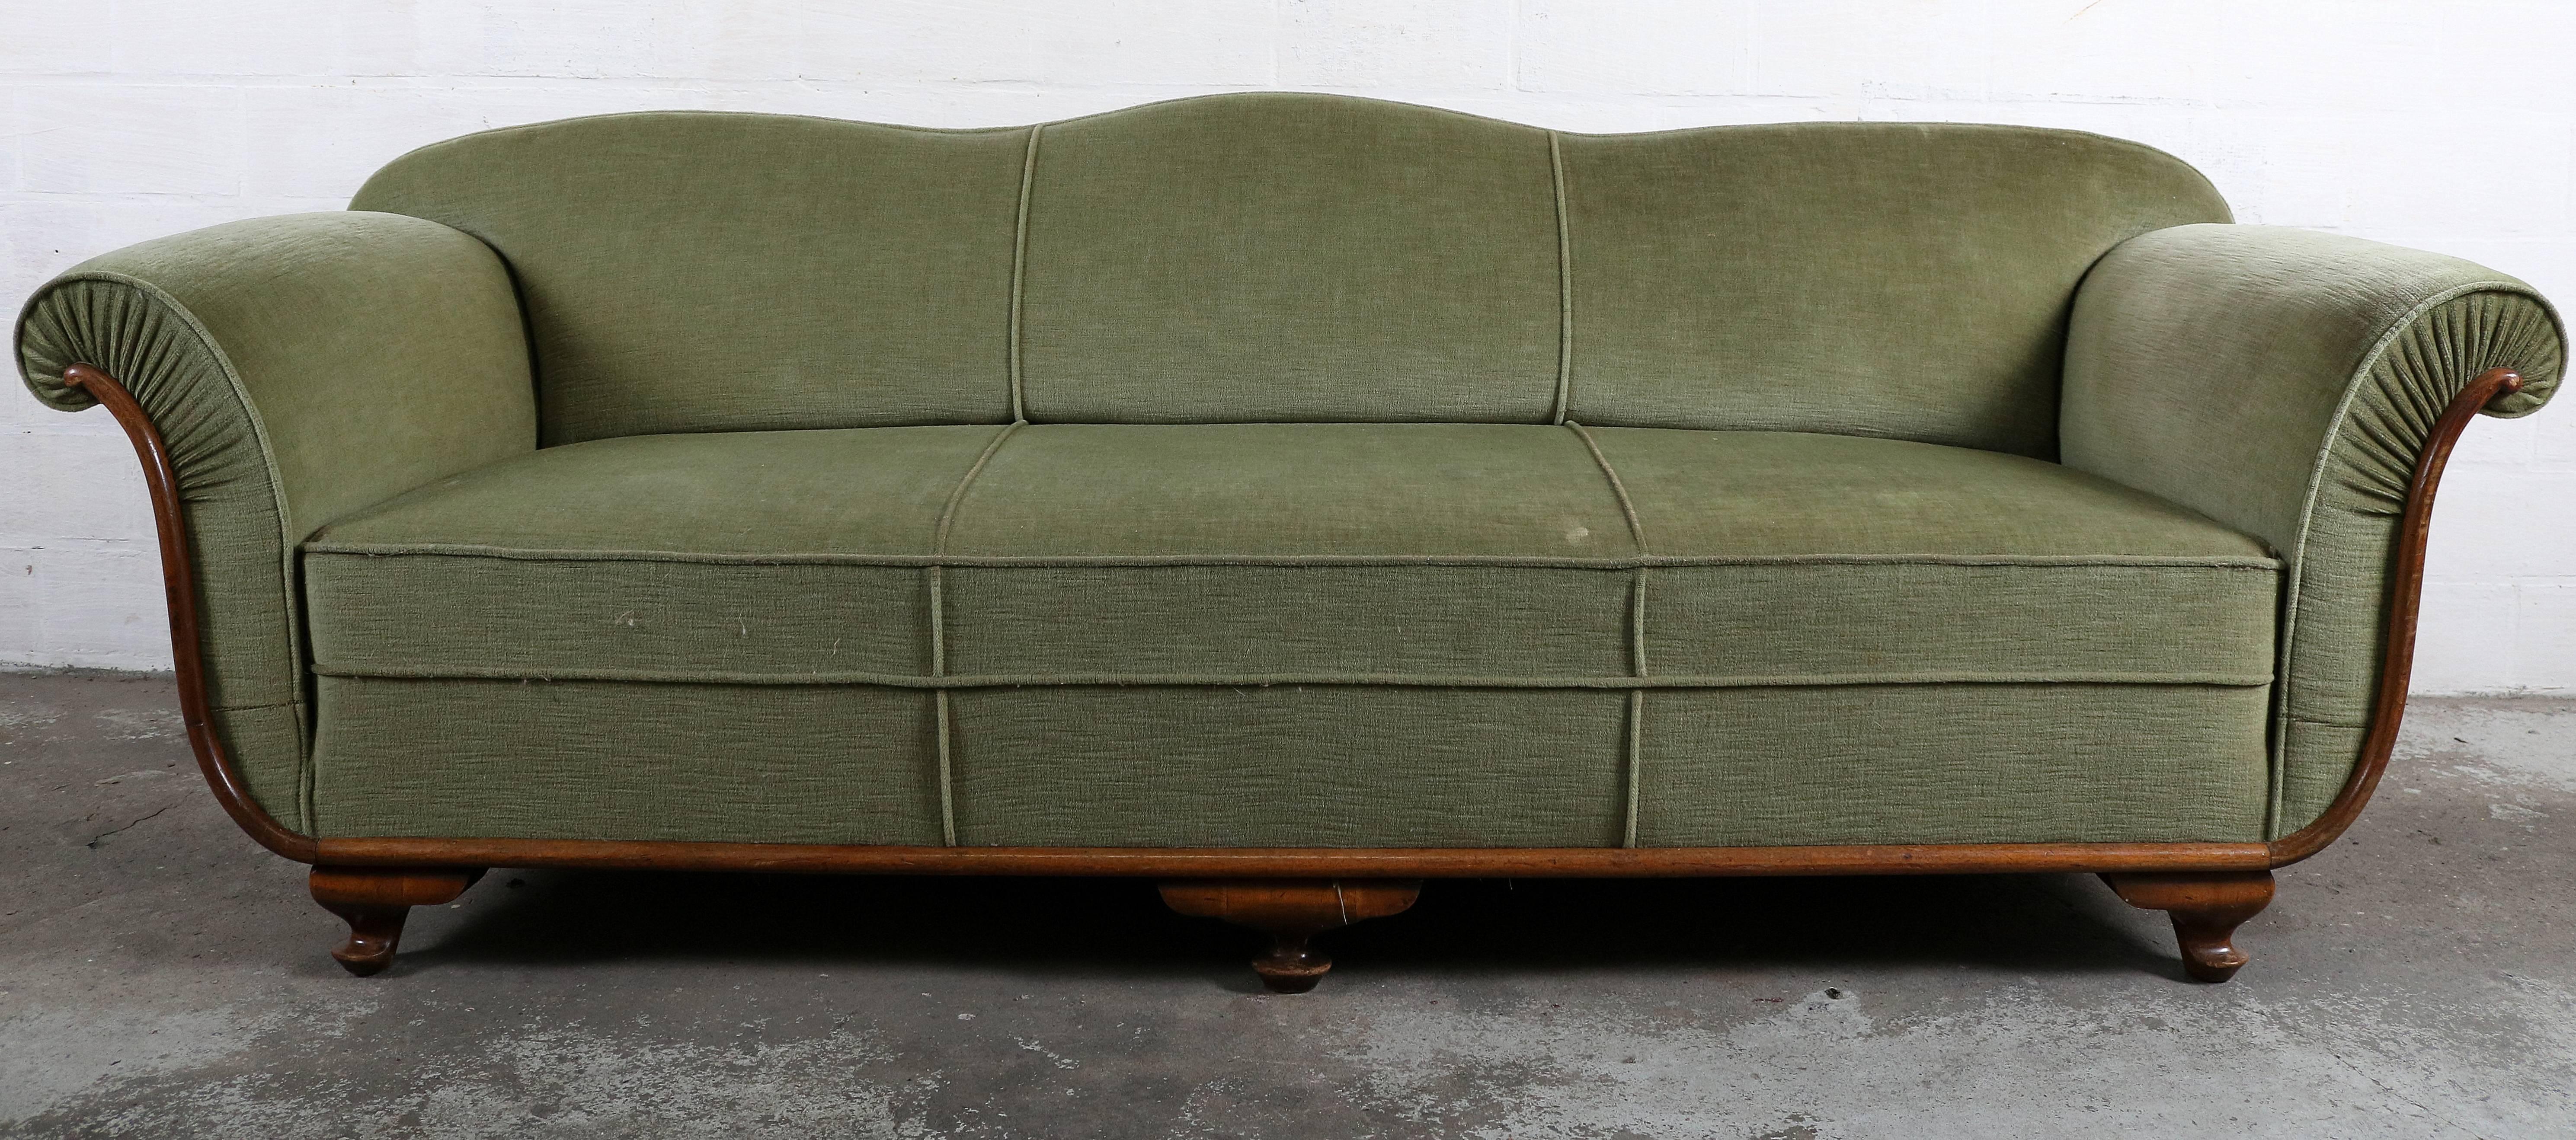 Art Deco sofa in green velvet fabric.
With wooden structure. In a very good condition.